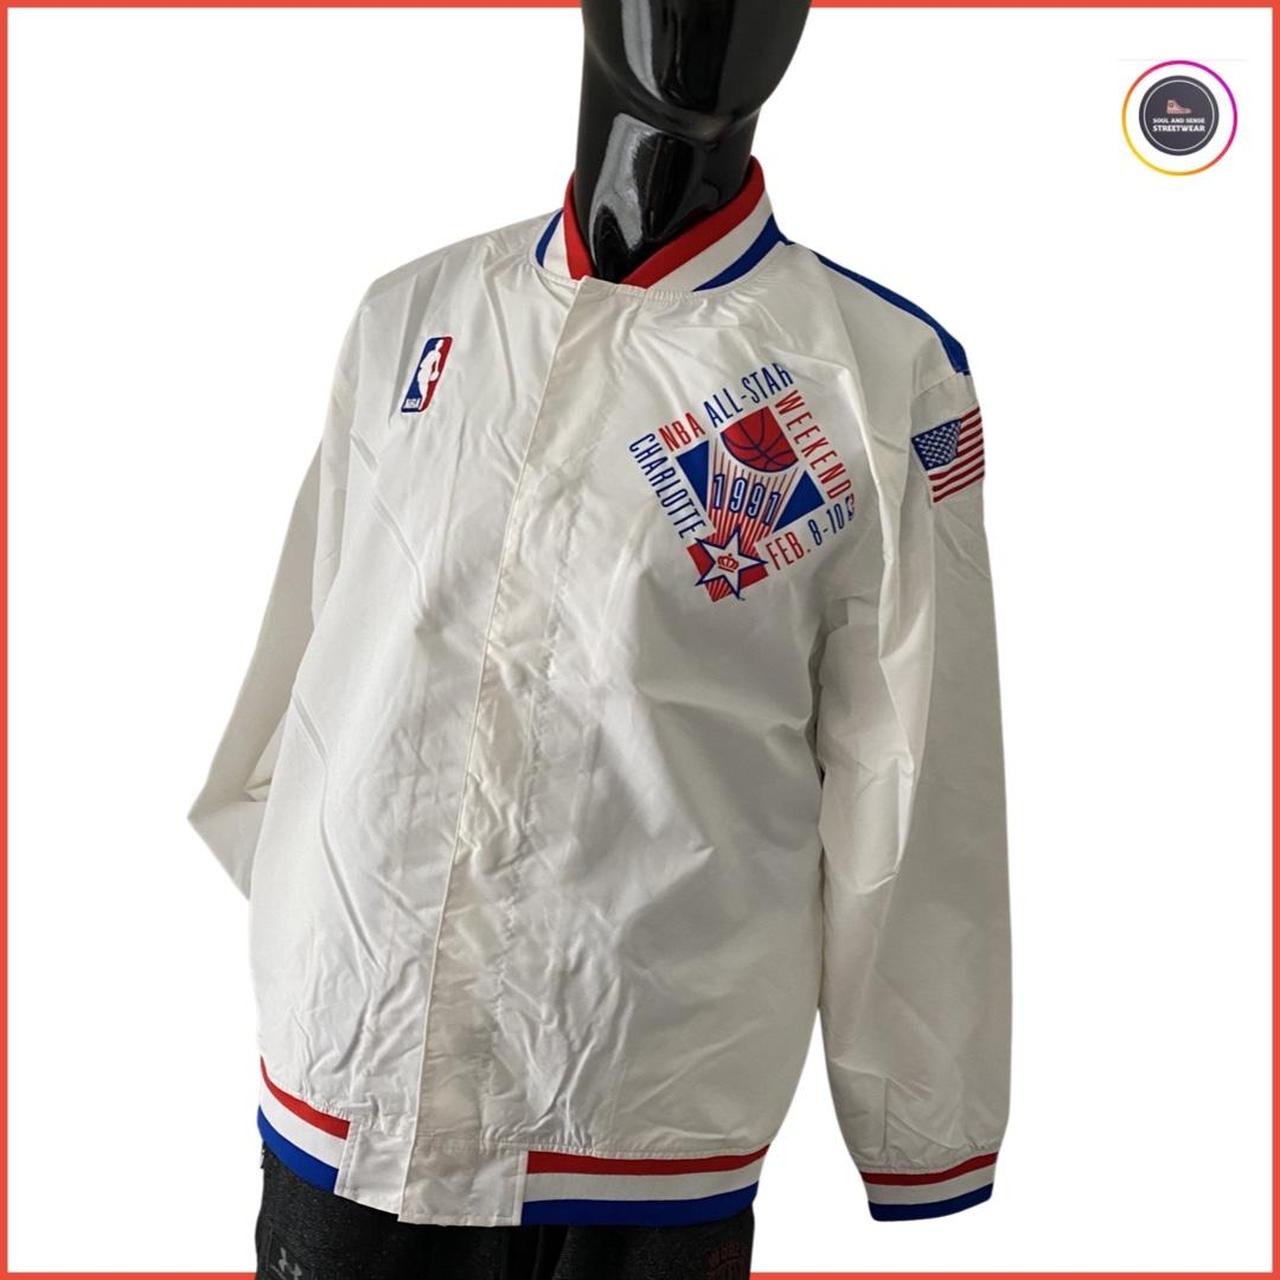 Mitchell & Ness - NBA All Star Authentic 1991 Warm Up Jacket White